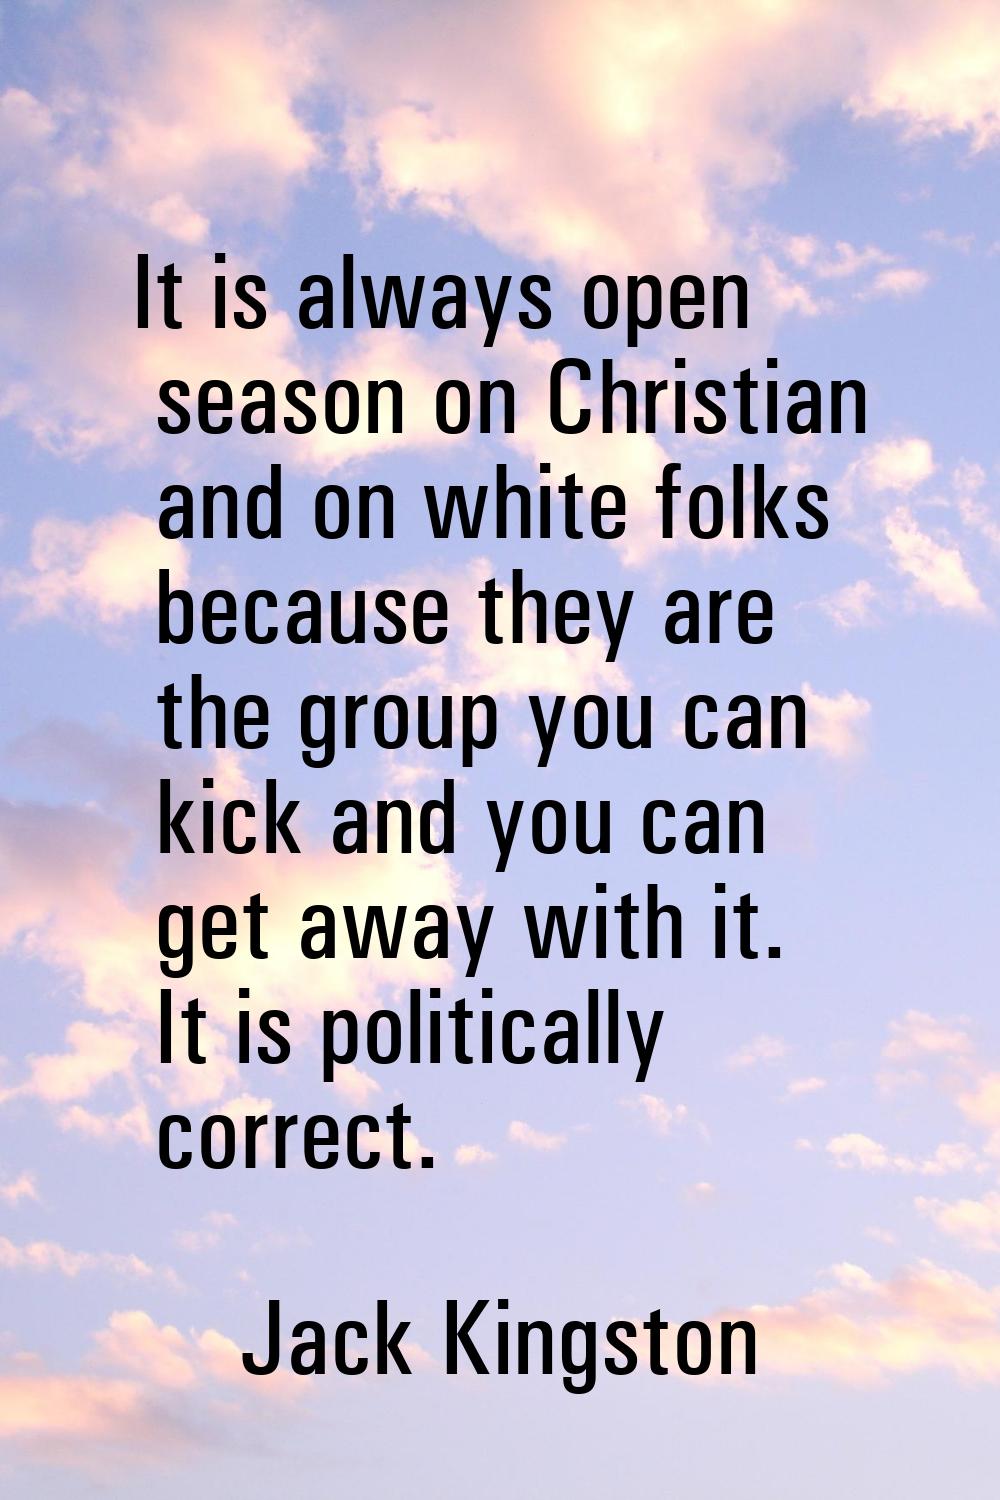 It is always open season on Christian and on white folks because they are the group you can kick an